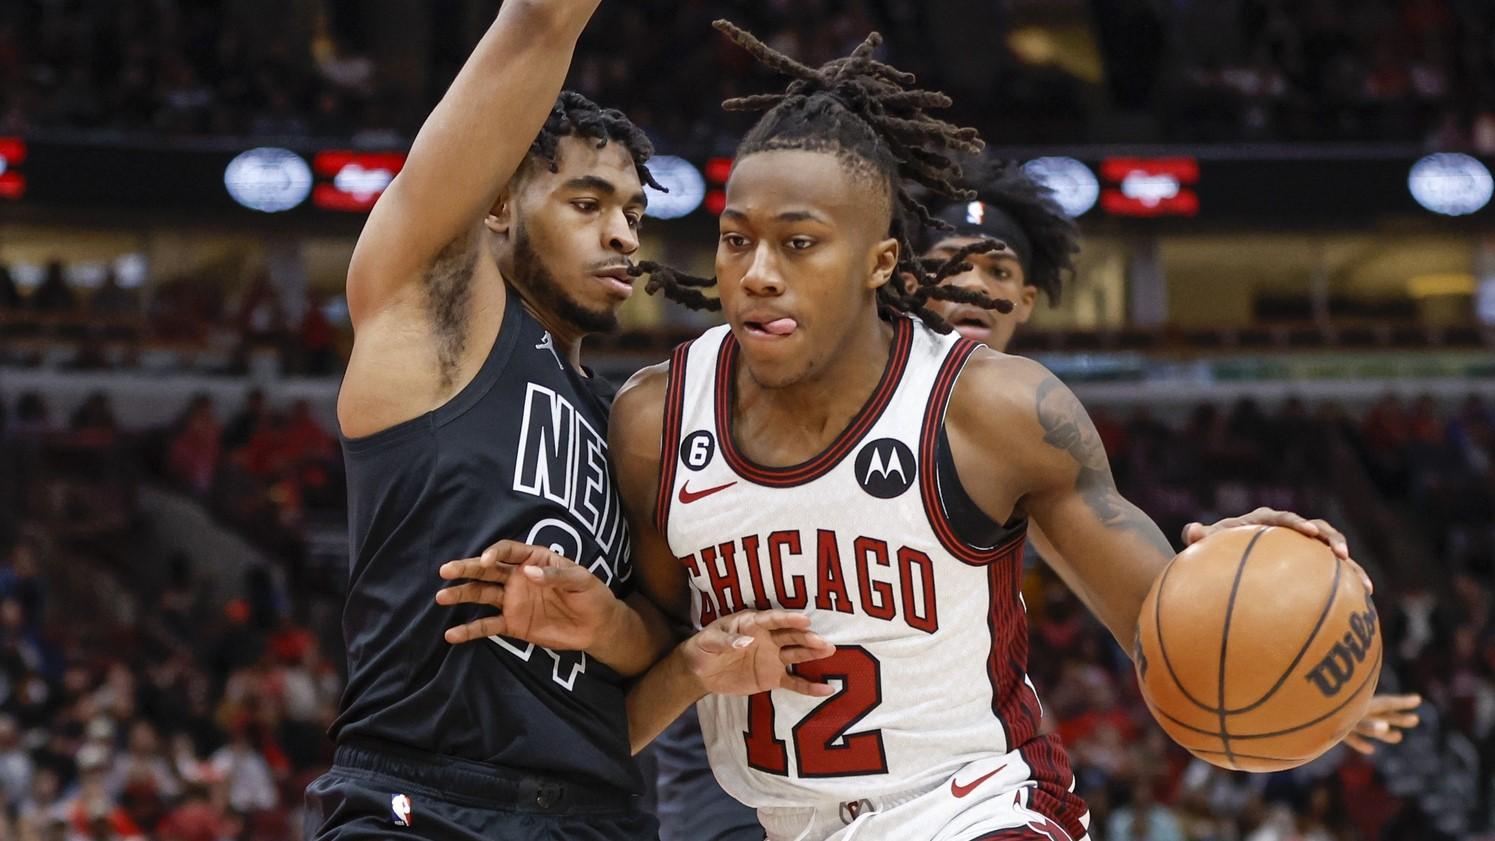 Feb 24, 2023; Chicago, Illinois, USA; Chicago Bulls guard Ayo Dosunmu (12) drives to the basket against Brooklyn Nets guard Cam Thomas (24) during the first half at United Center. / Kamil Krzaczynski-USA TODAY Sports